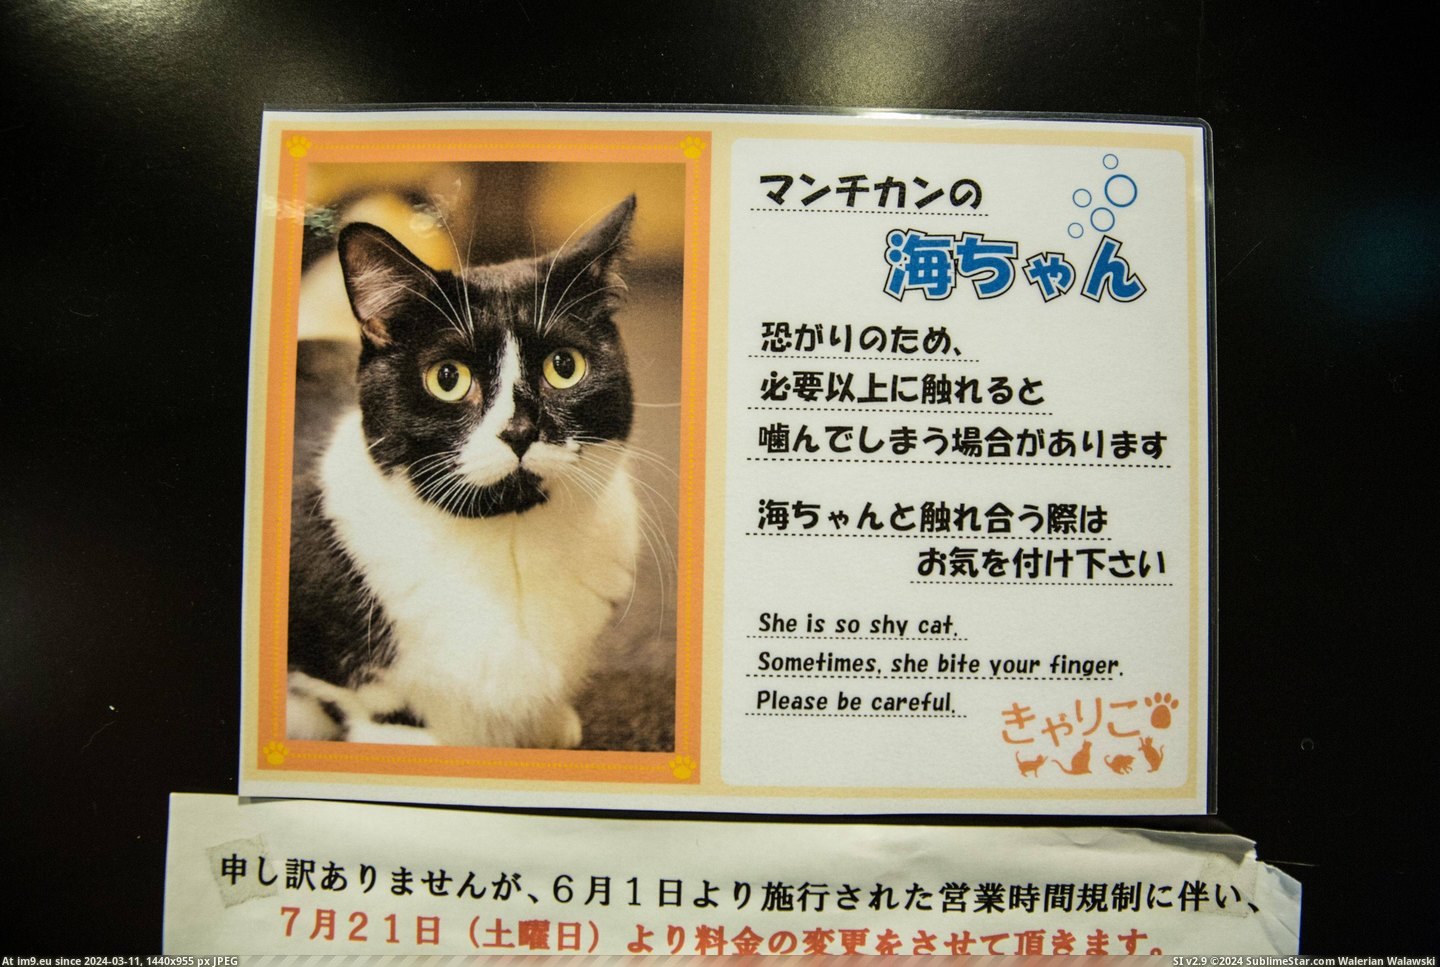 #Cats #Cat #Visited #Tokyo #Cafe [Cats] I visited a cat cafe in Tokyo... 10 Pic. (Изображение из альбом My r/CATS favs))